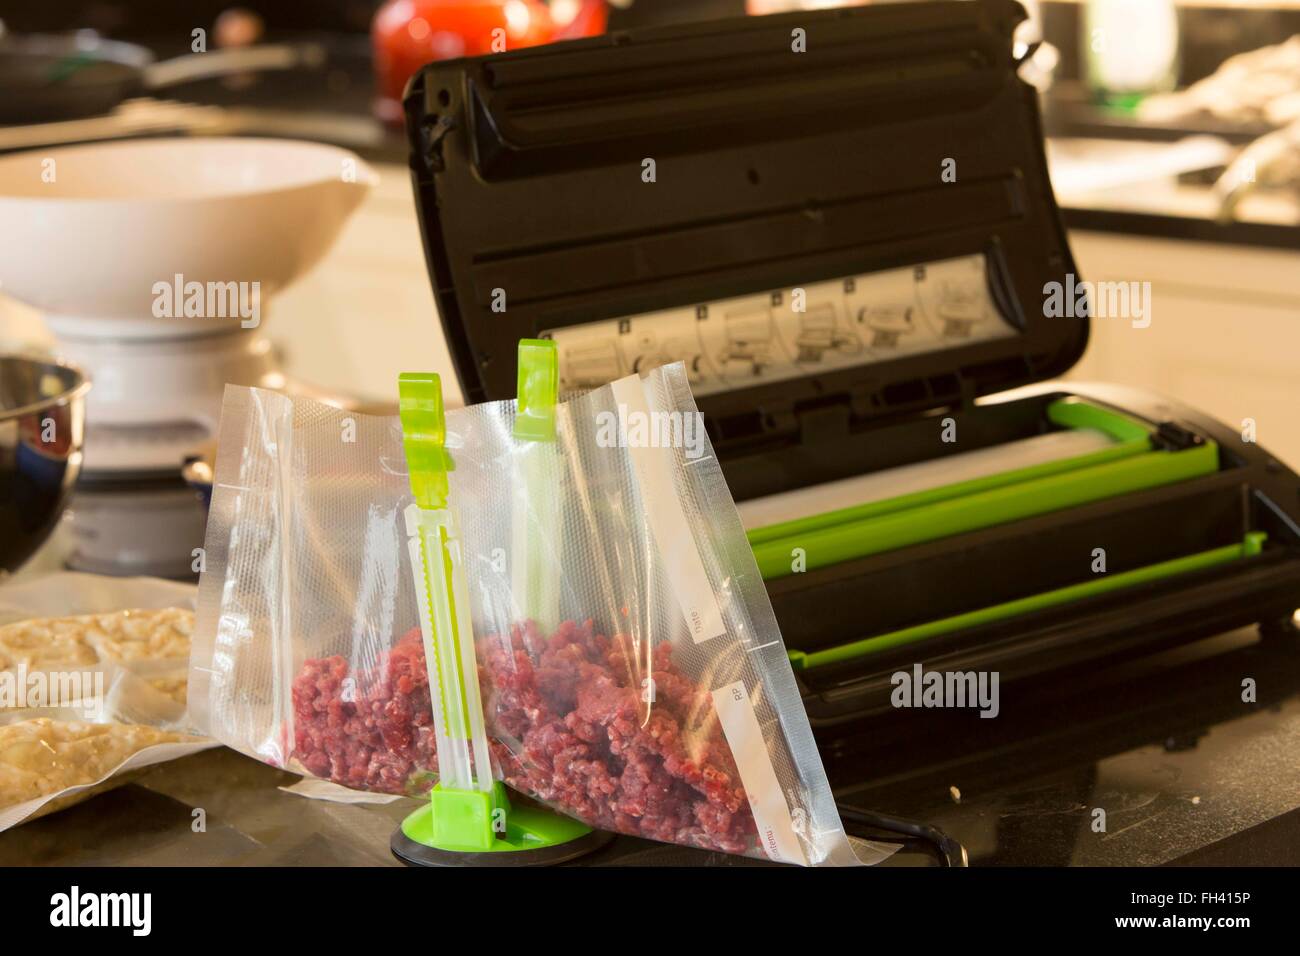 Preparing food for the freezer at home using a vacuum sealer to keep the meat (beef in this case) fresh. Stock Photo